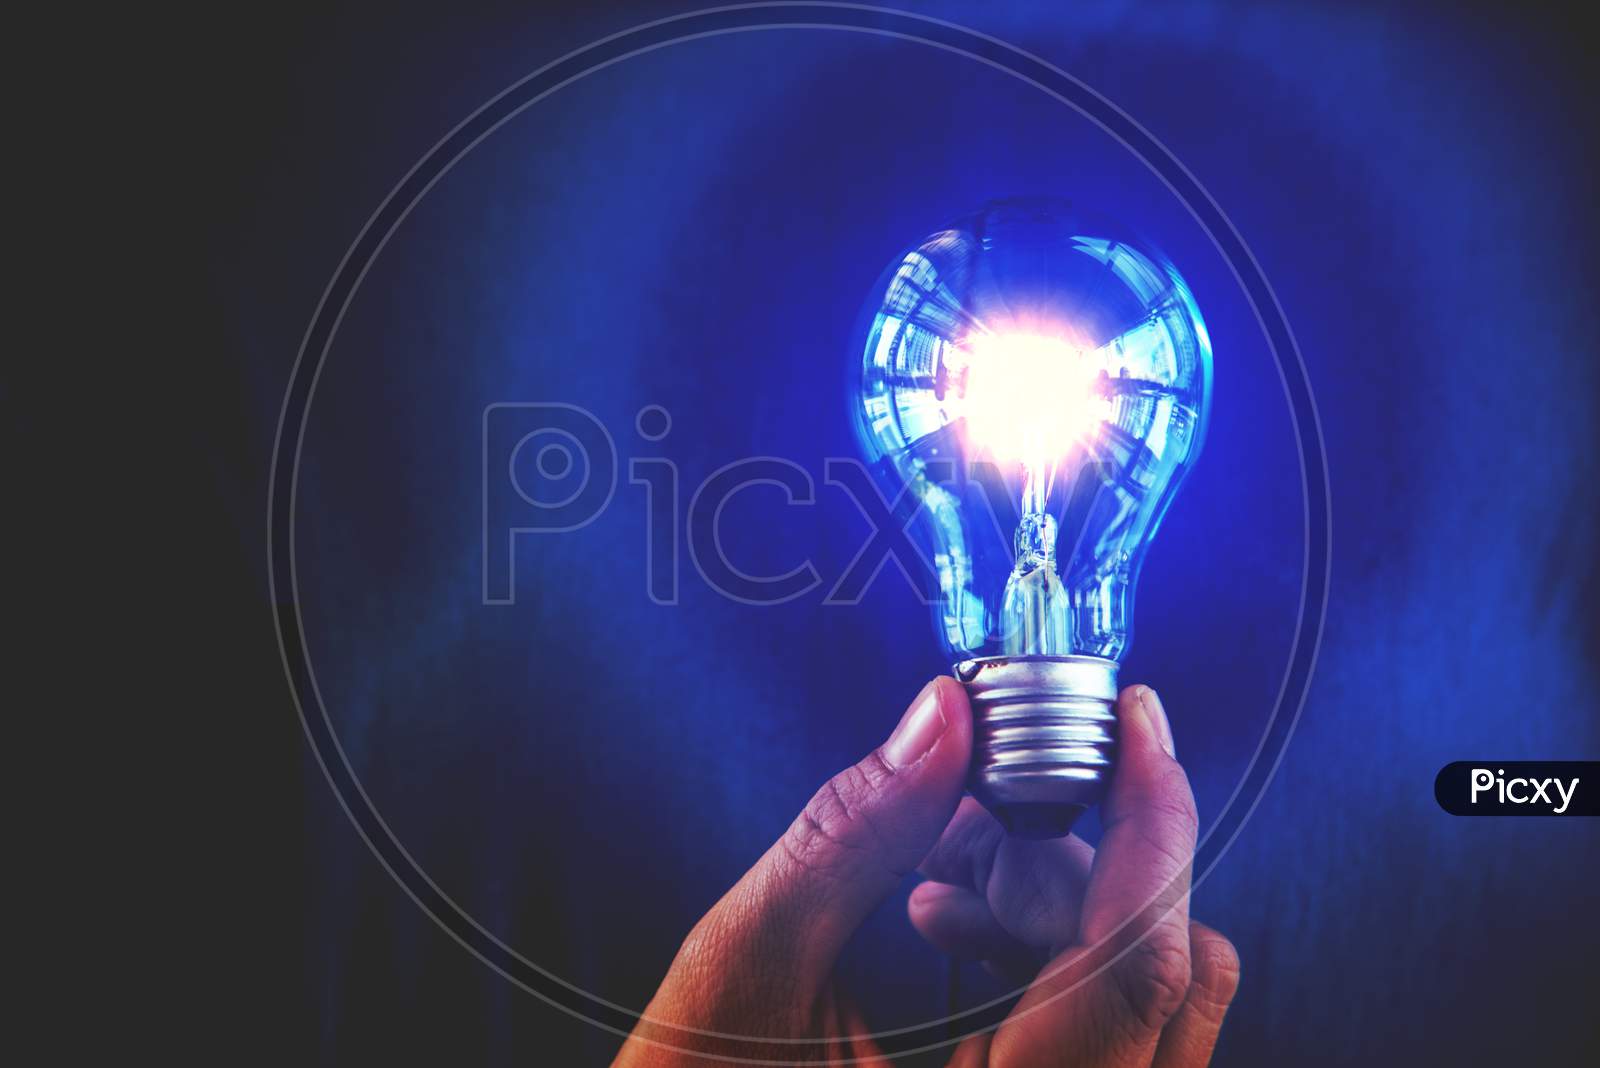 Bulb With Lighting. Idea And Creative Concept  For Startup New Project. Technology Object And Electrical Part Theme. Energy And Power Saving Theme. Copy Space In The Left Side. Blue Filter Background